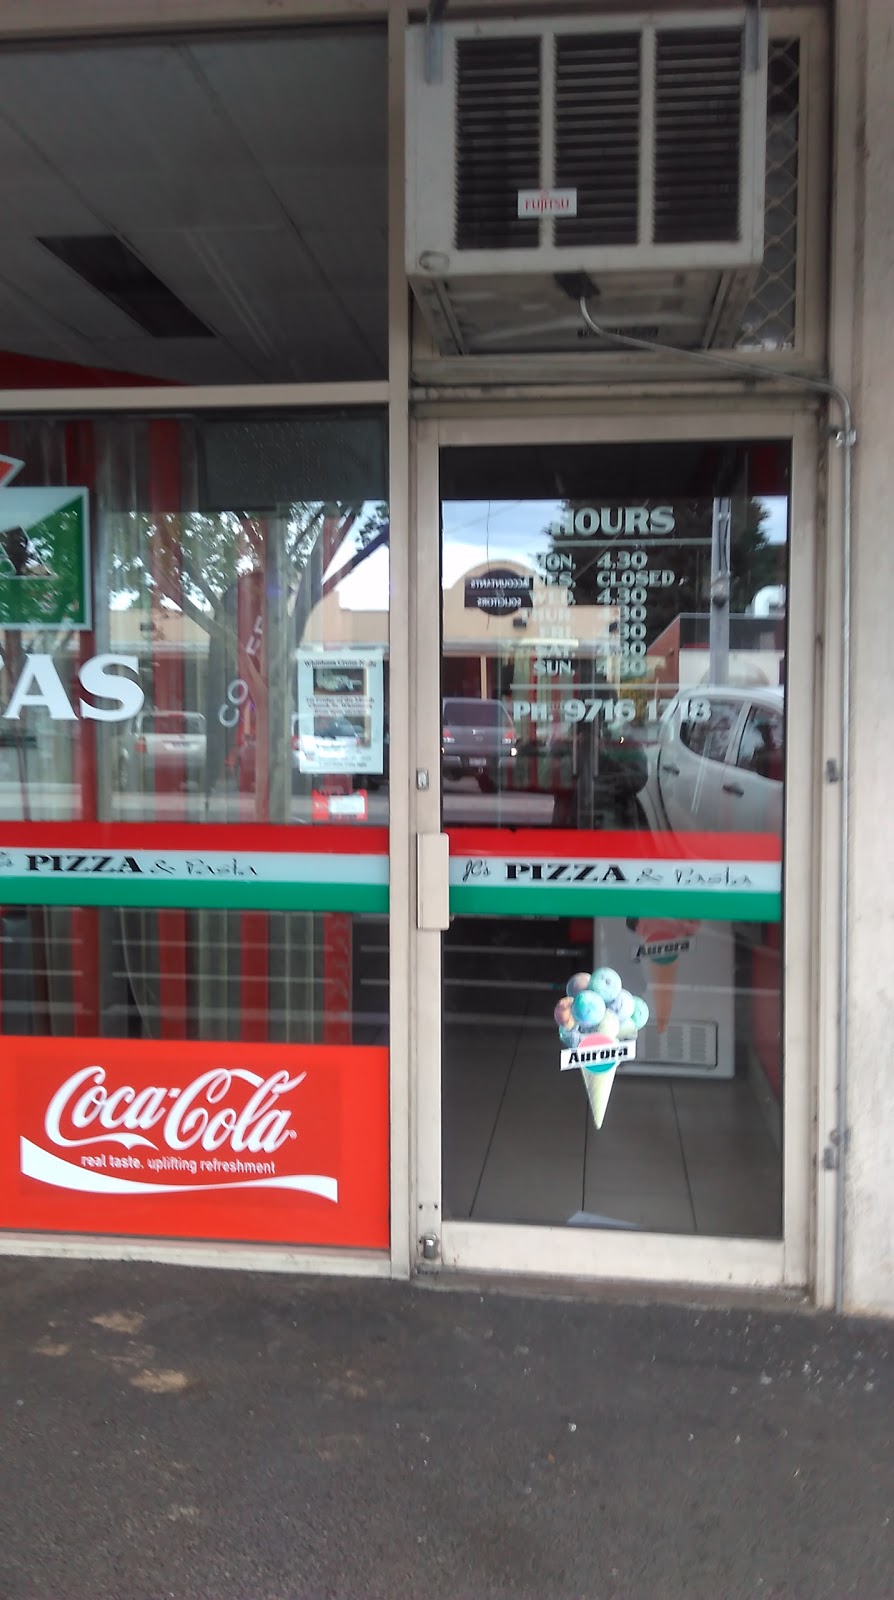 JCs Pizza and Pasta | meal takeaway | Shop 1/56 Church St, Whittlesea VIC 3757, Australia | 0397161718 OR +61 3 9716 1718